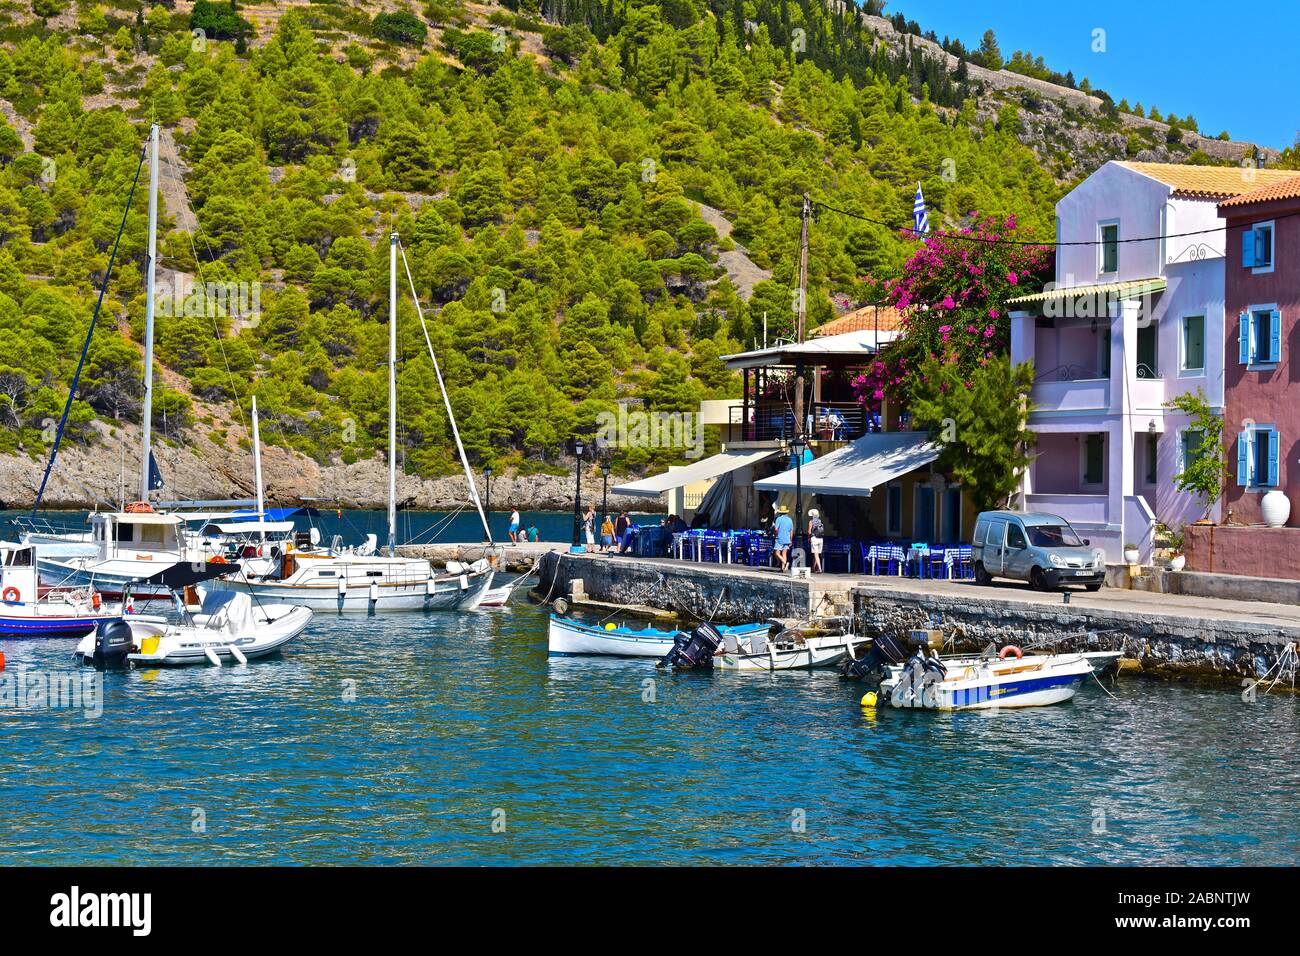 A view across the pretty natural harbour of the beautifulcoastal village of Assos. Leisure craft moored in front of harbourside restaurant cafés. Stock Photo